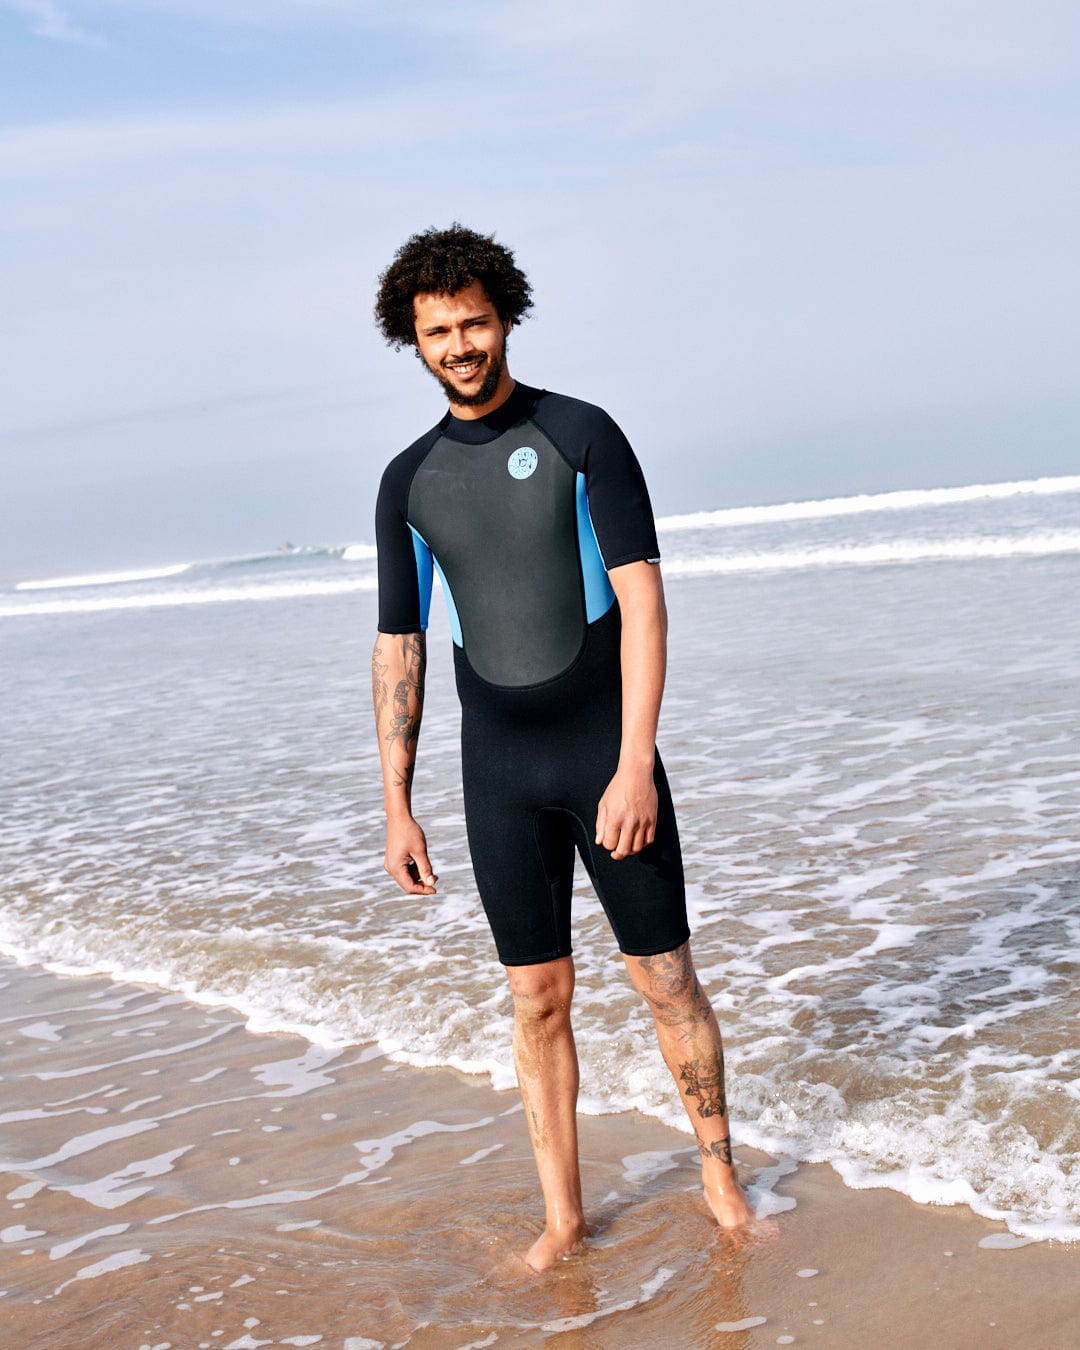 A man in a Saltrock Core - Men's 3/2 Shortie Wetsuit in Black/Blue smiles while standing on a sandy beach, ocean waves behind him.